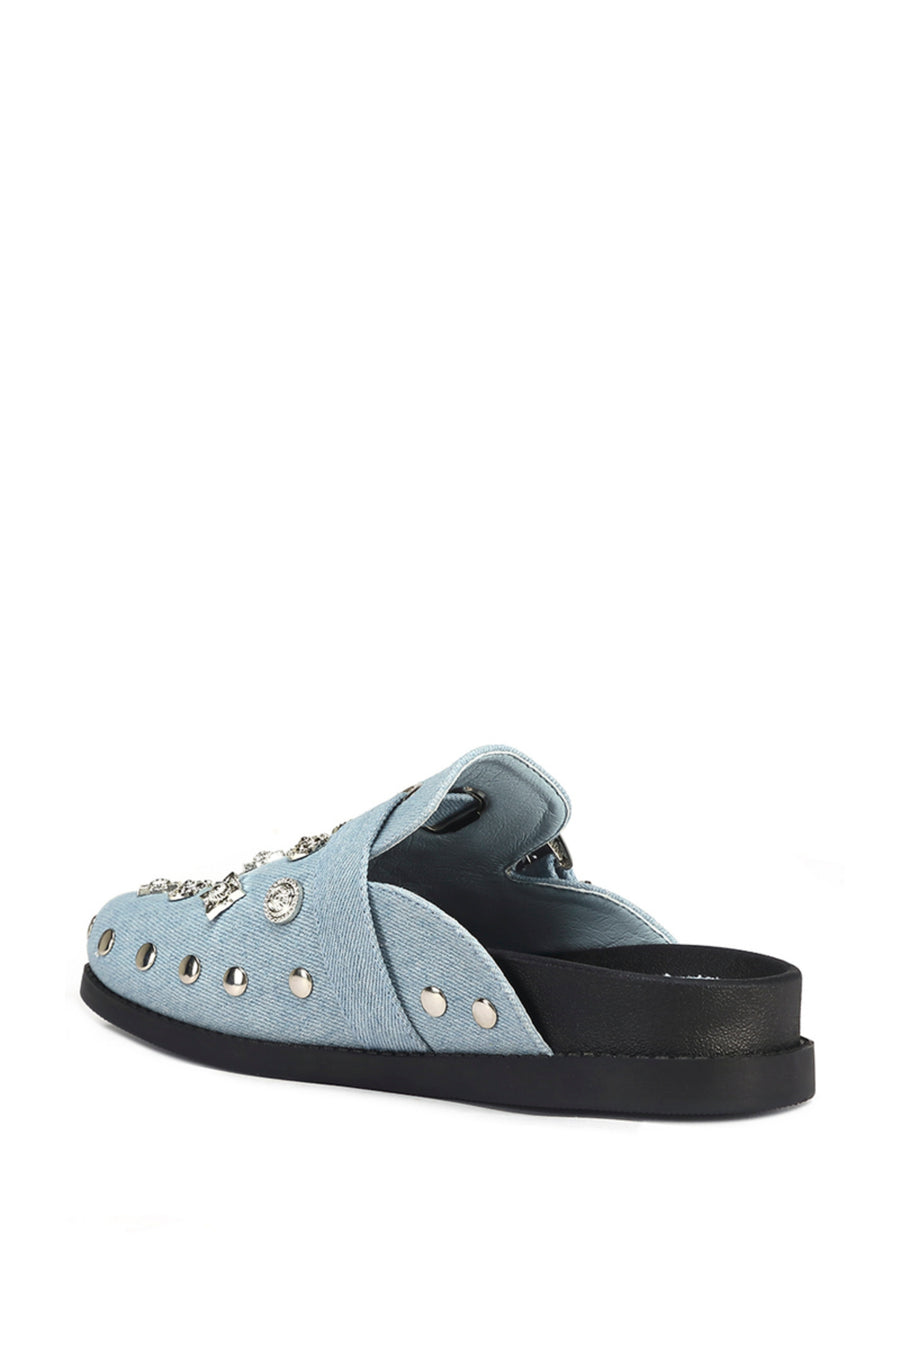 back view of light wash denim slip on western mule with silver studded accents and a western belt buckle detail